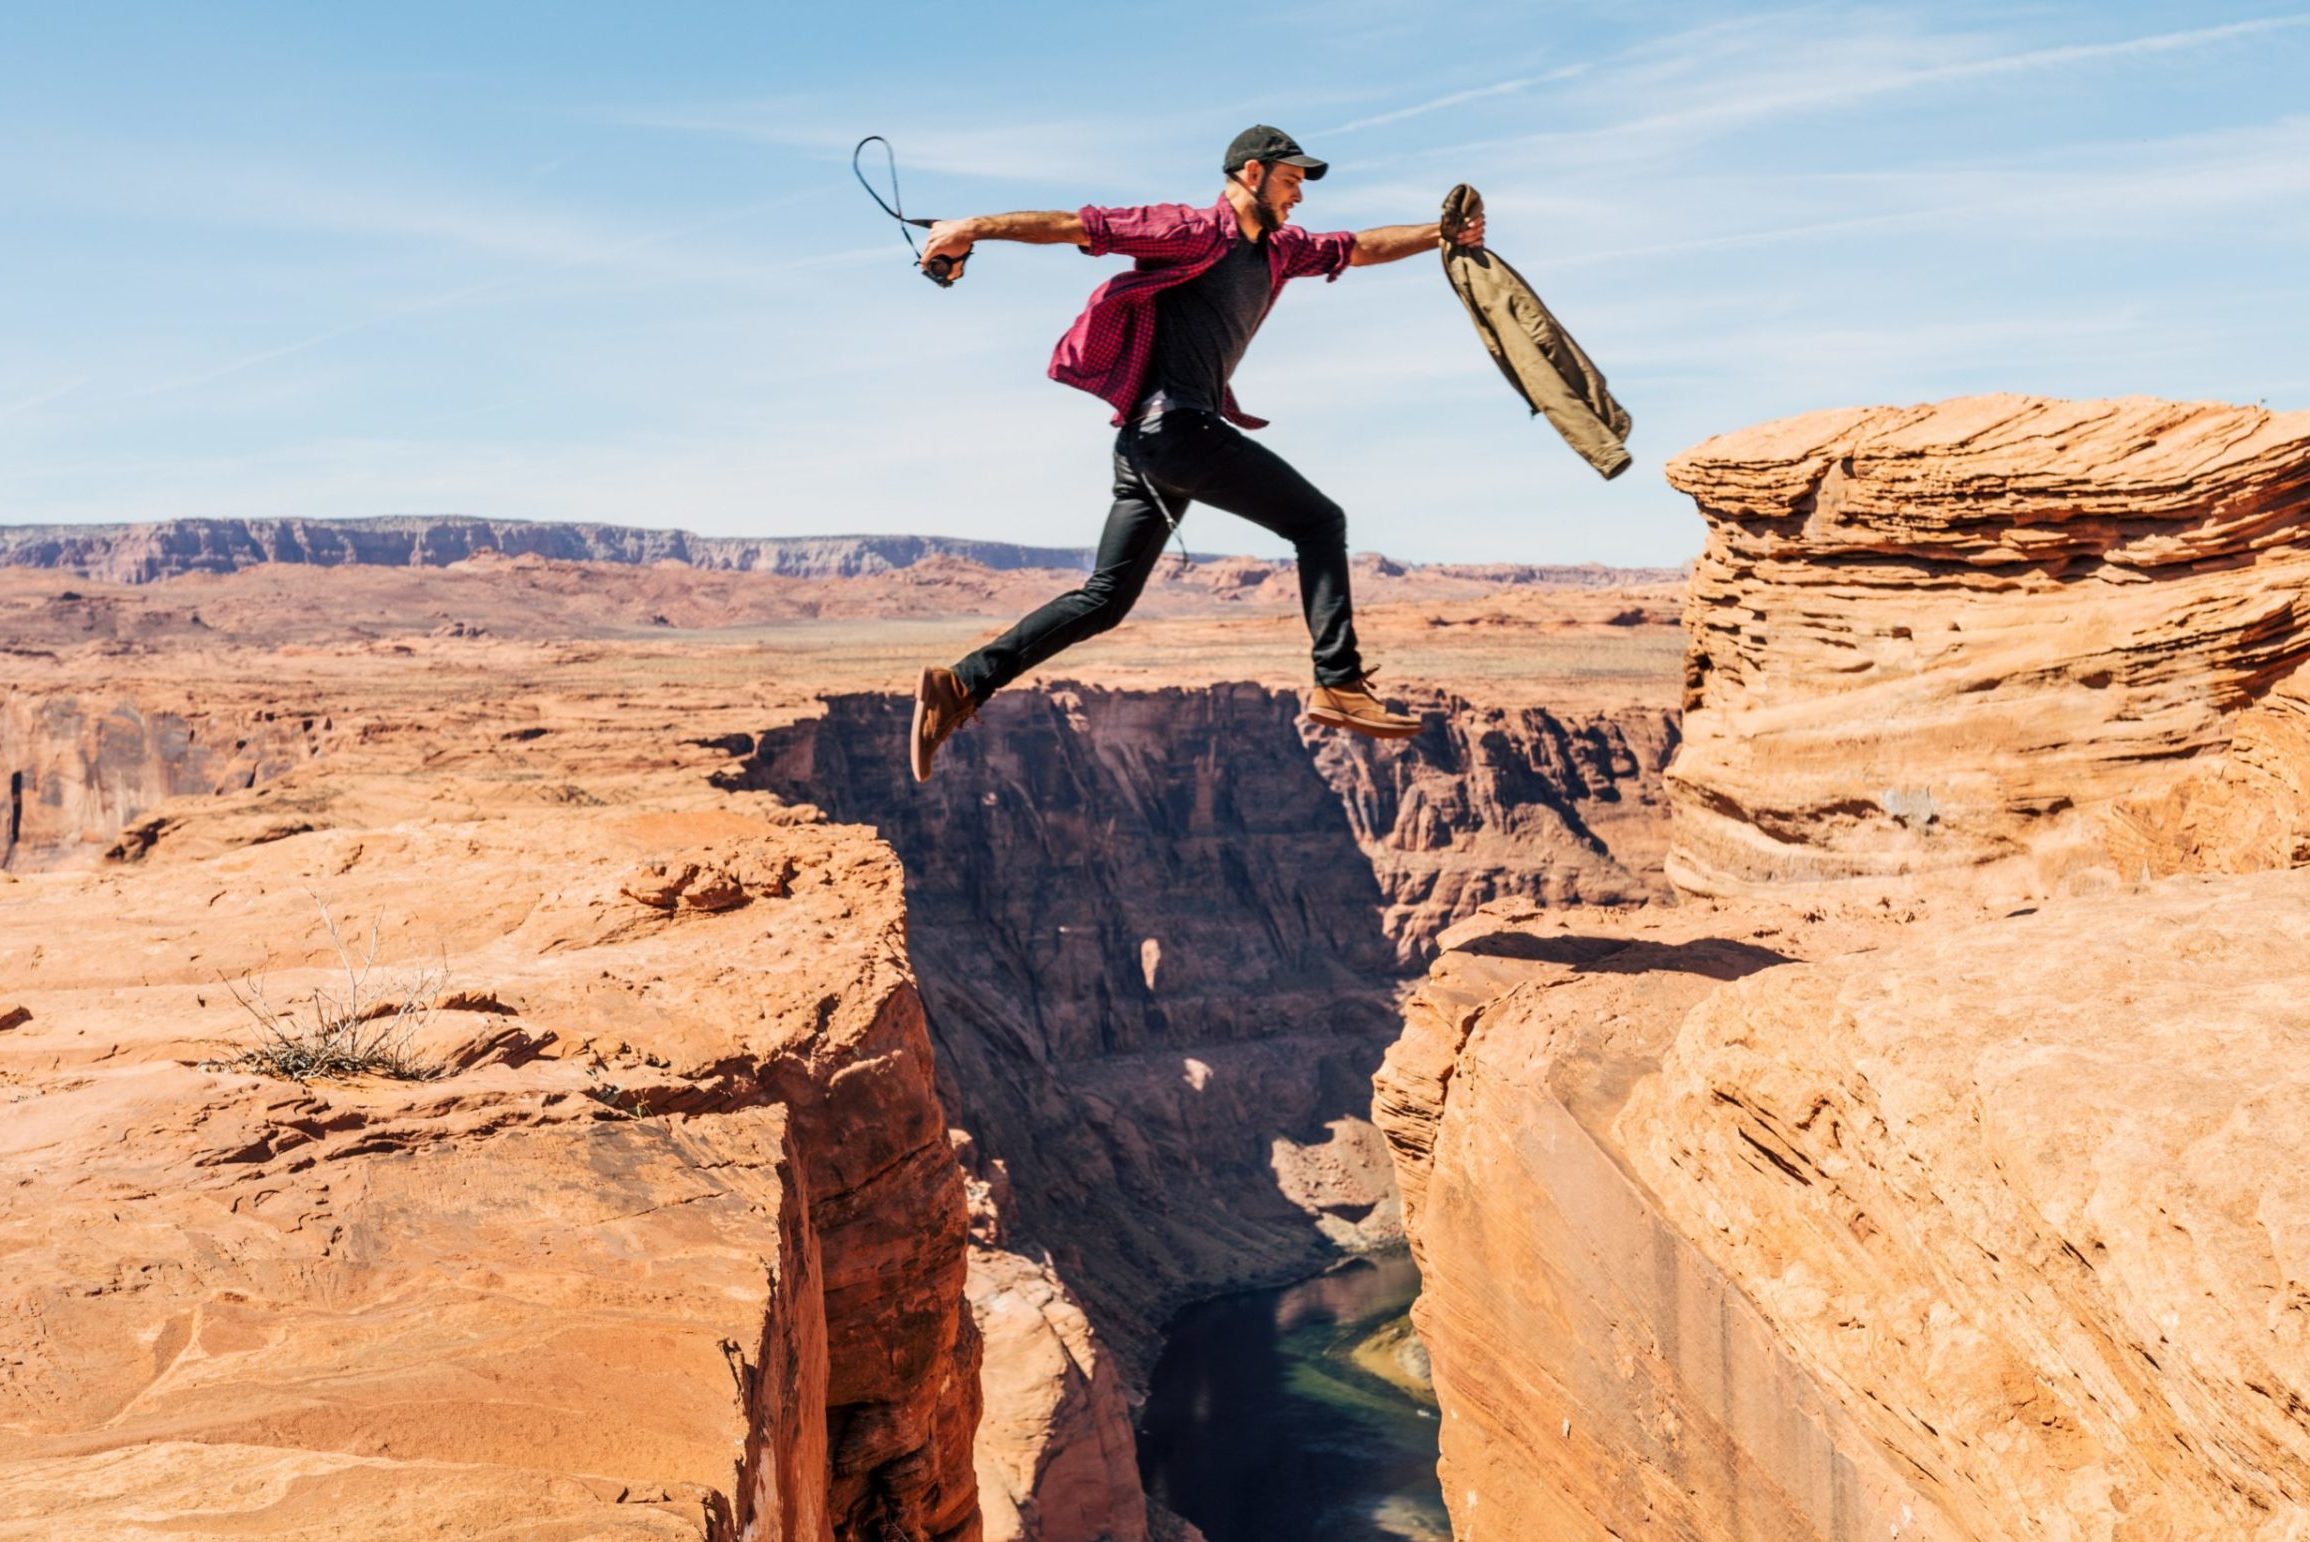 Image of someone jumping between cliffs.